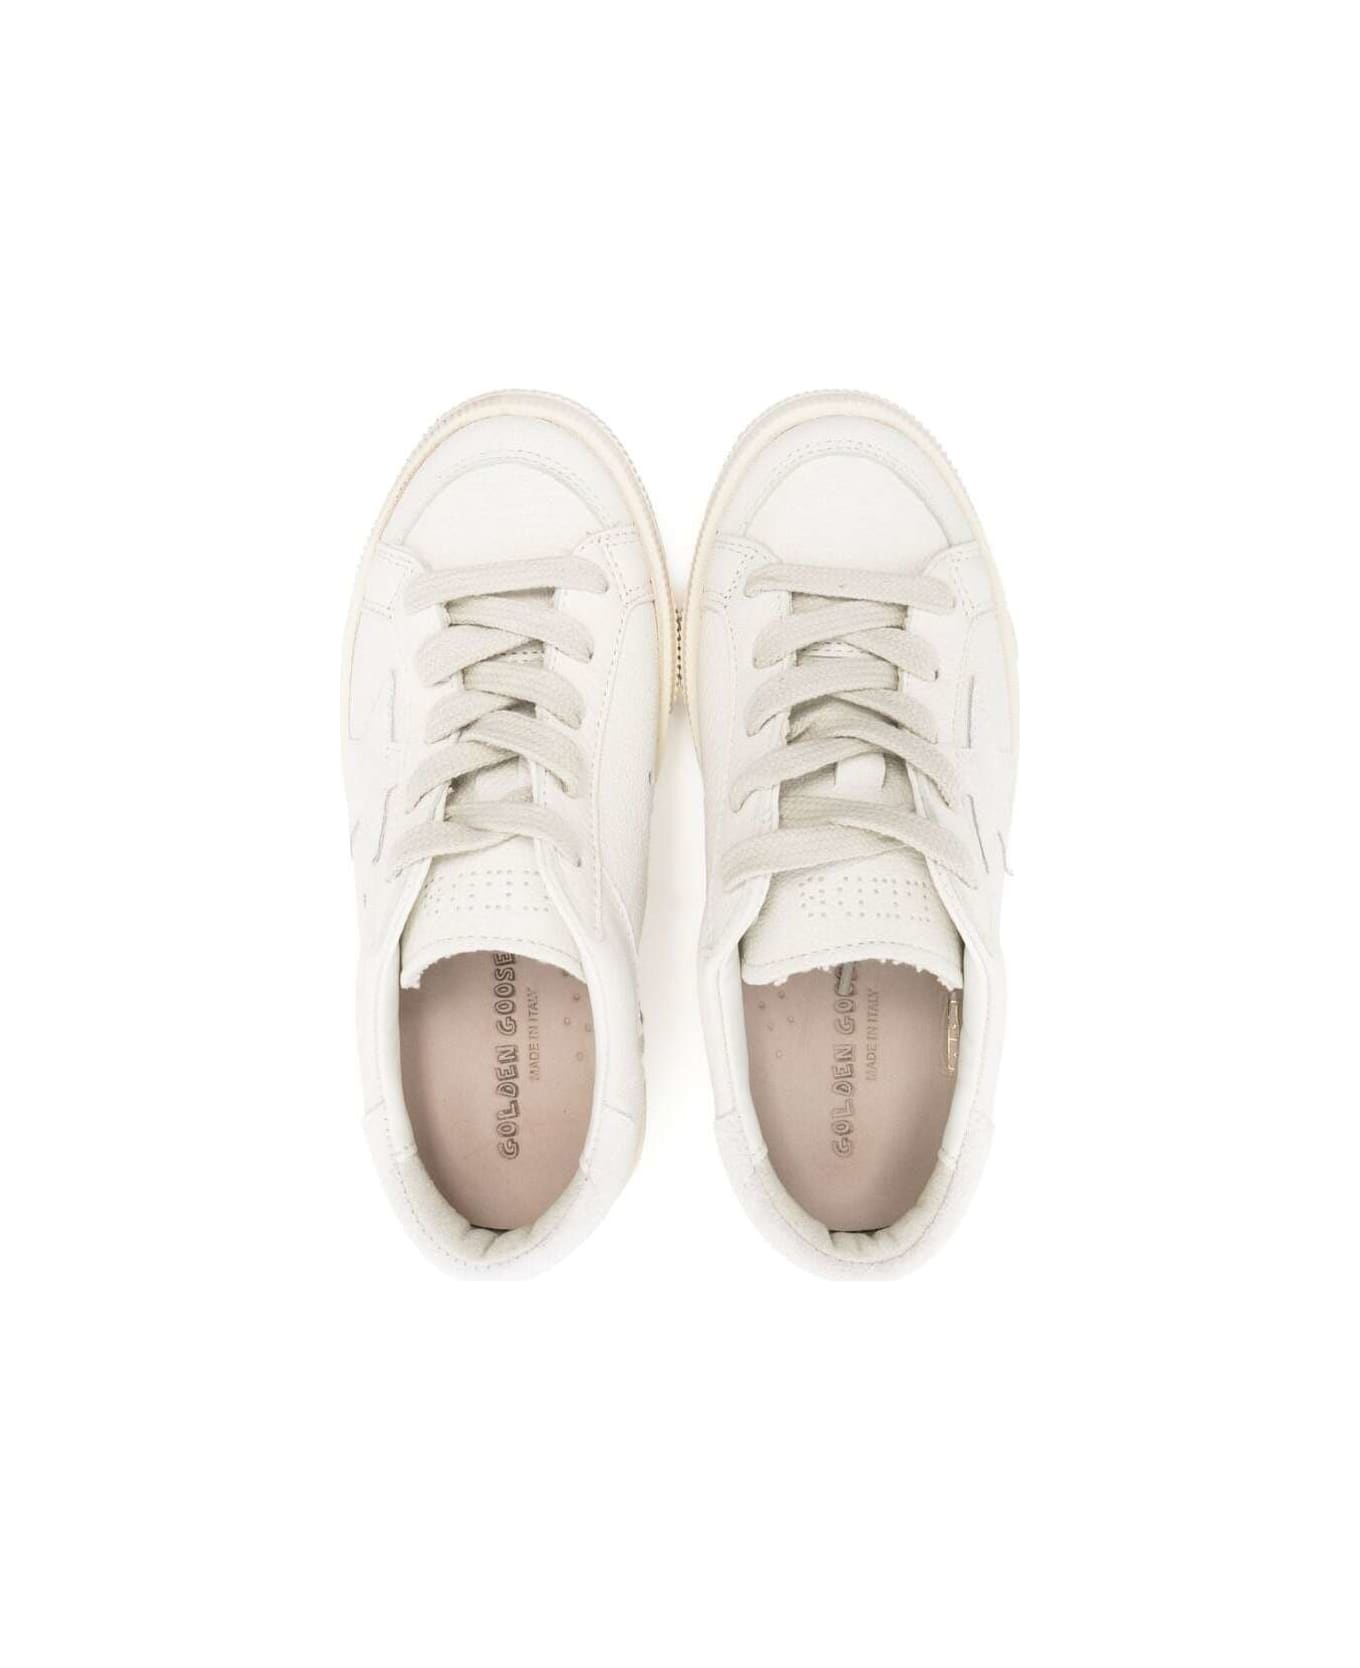 Golden Goose May Nappa Upper Suede Star And Heel Include Stesso Codice Gyf - White